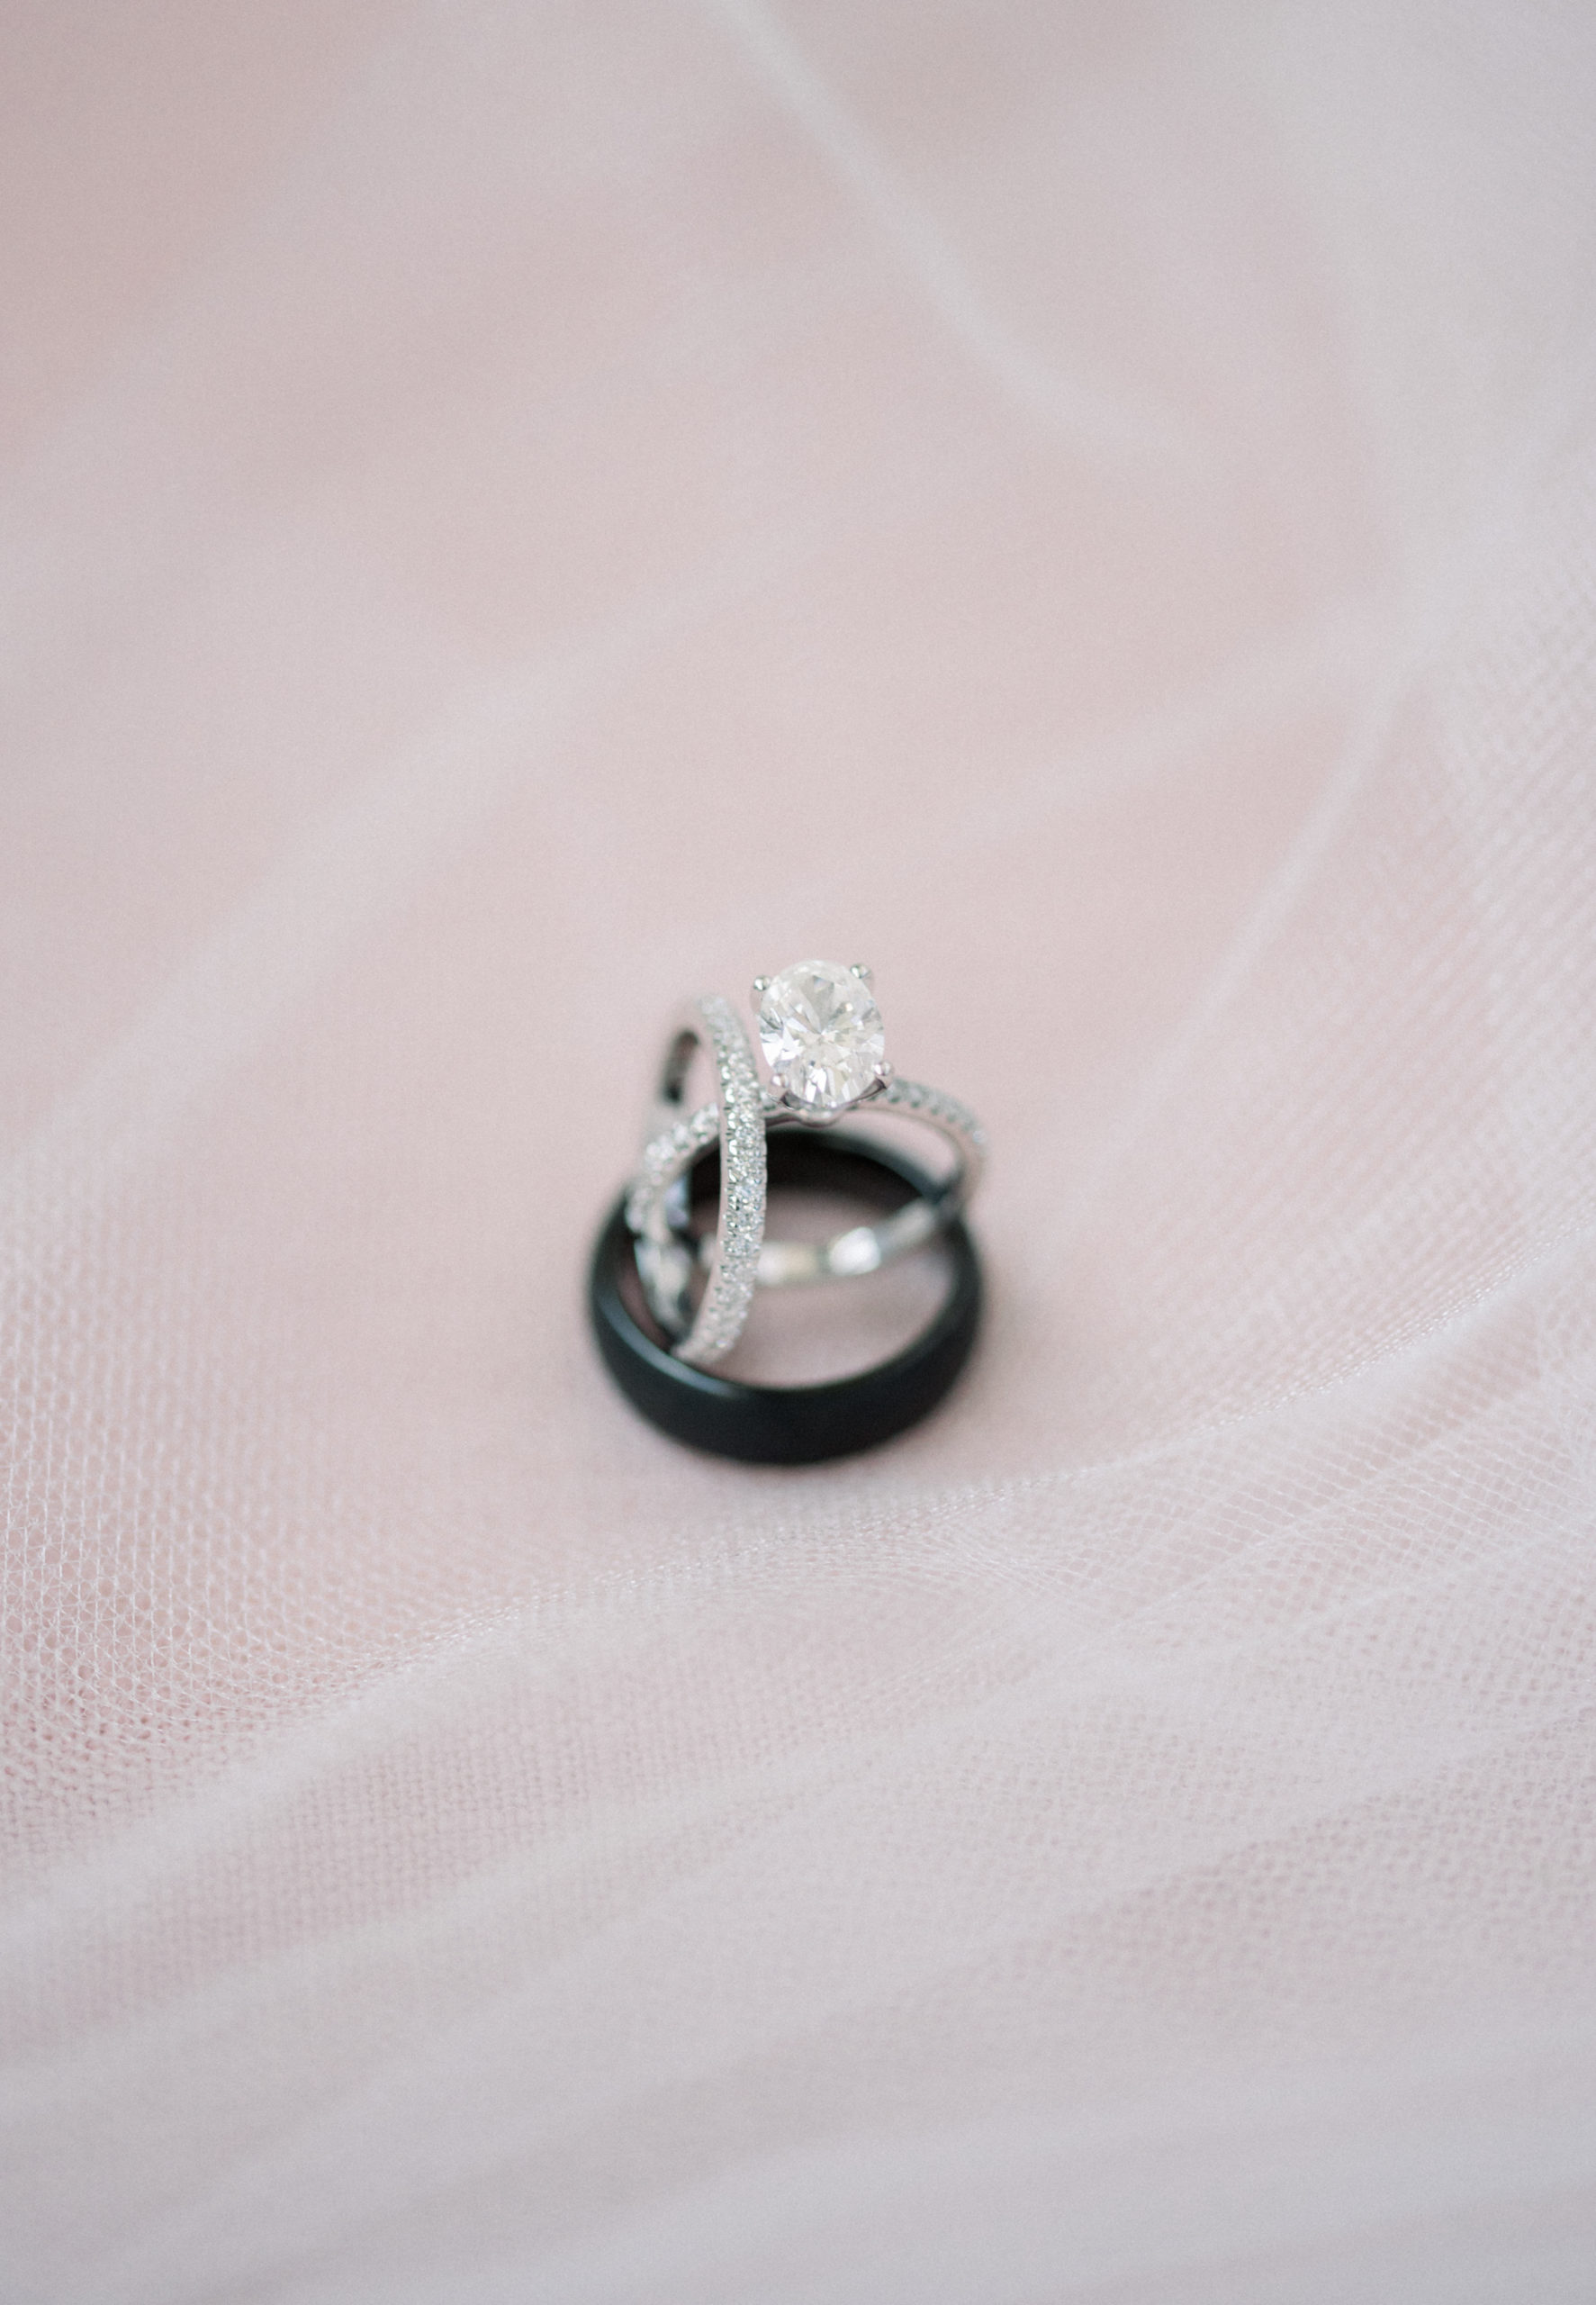 wedding ring details photos set up on a pink background with the veil